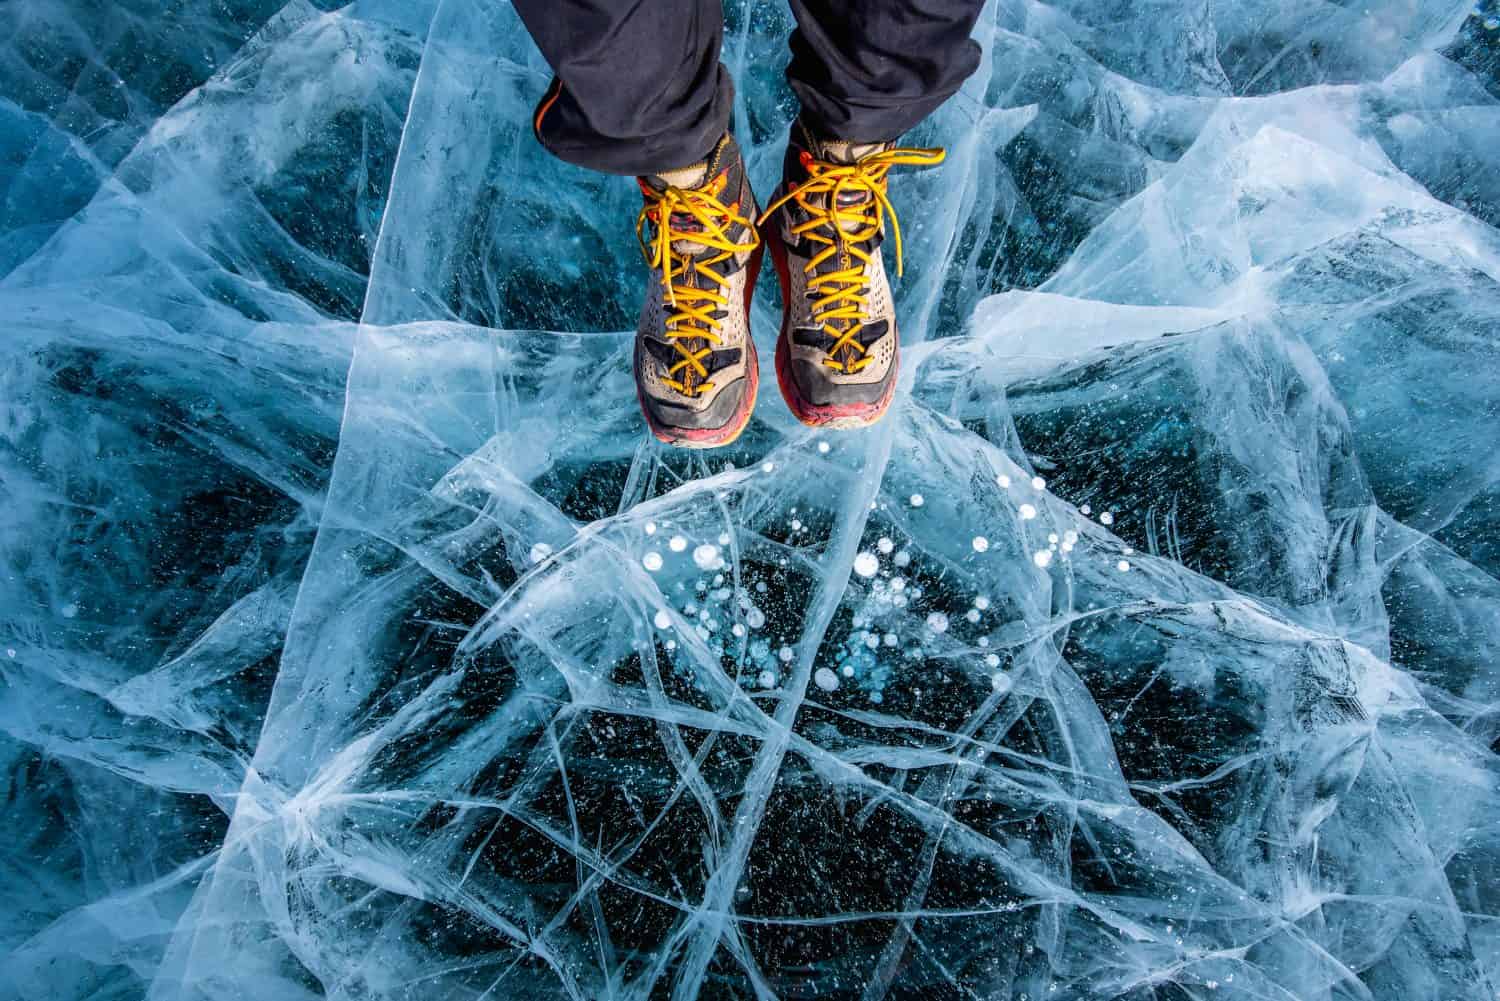 Traveller man foot standing on cracks surface of the natural ice in frozen water at Olkhon Island, Baikal lake, Russia